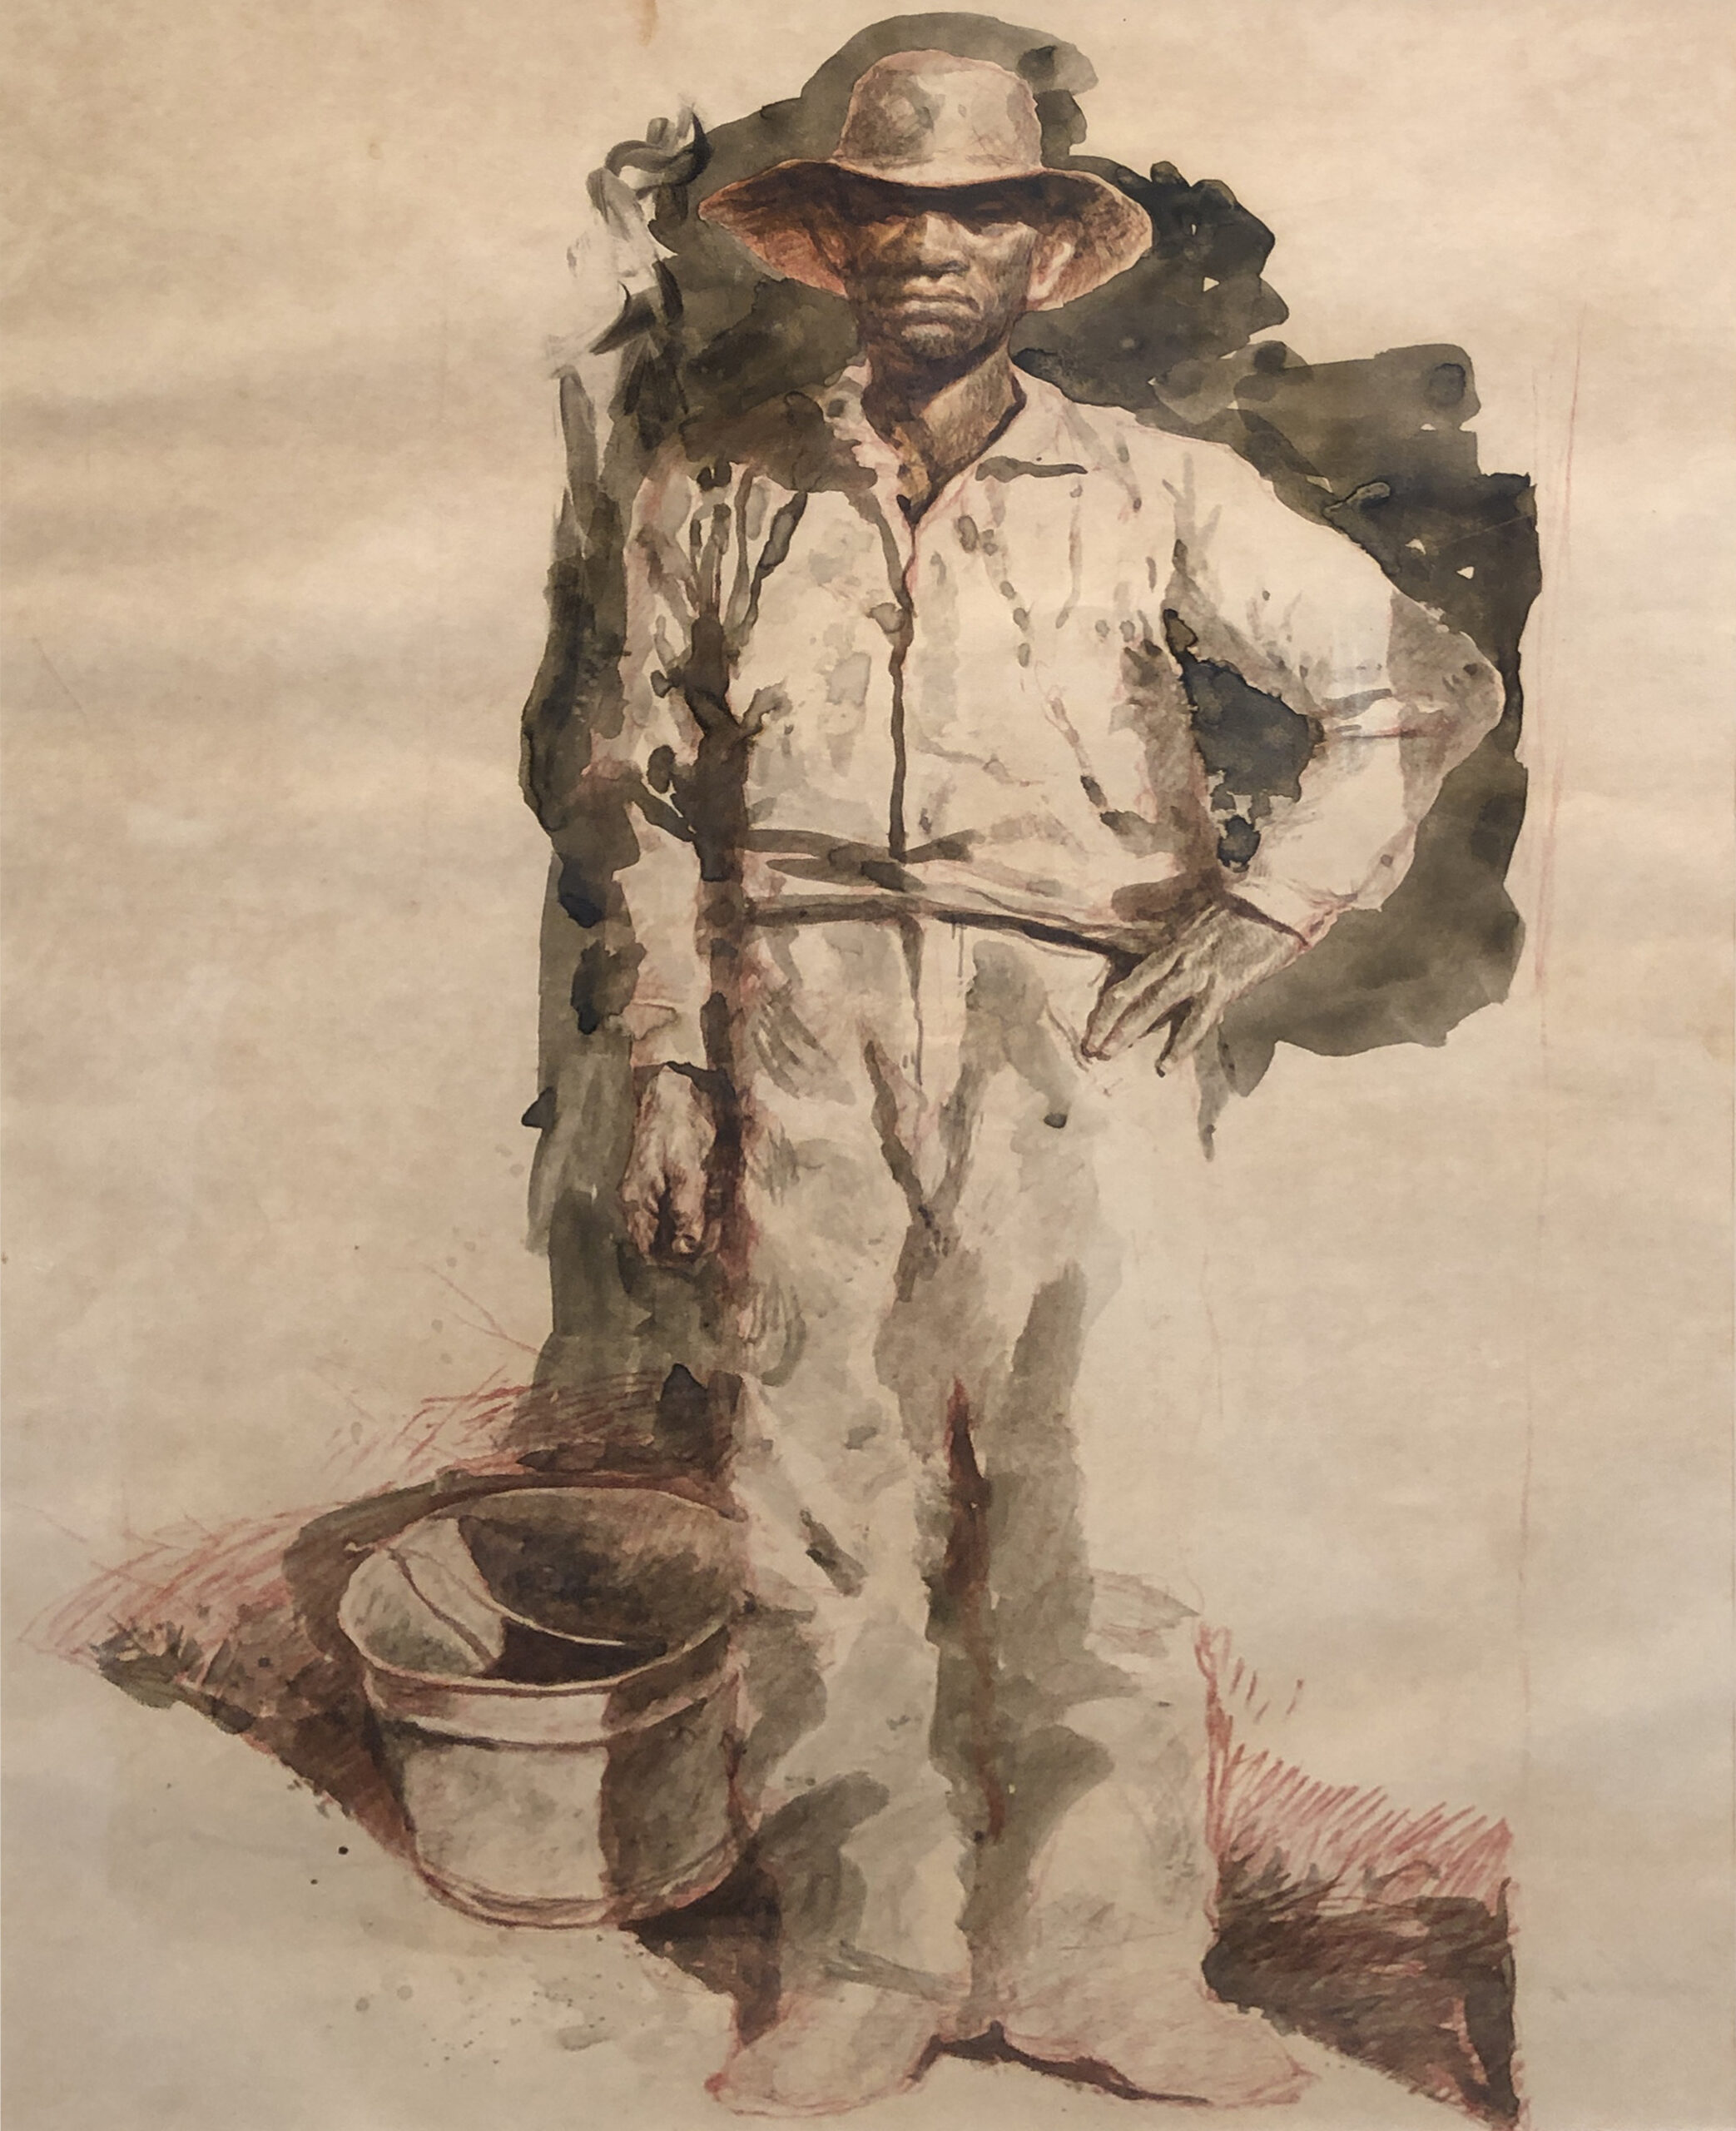 Oliver, Study for Empty Pail, c. 1965